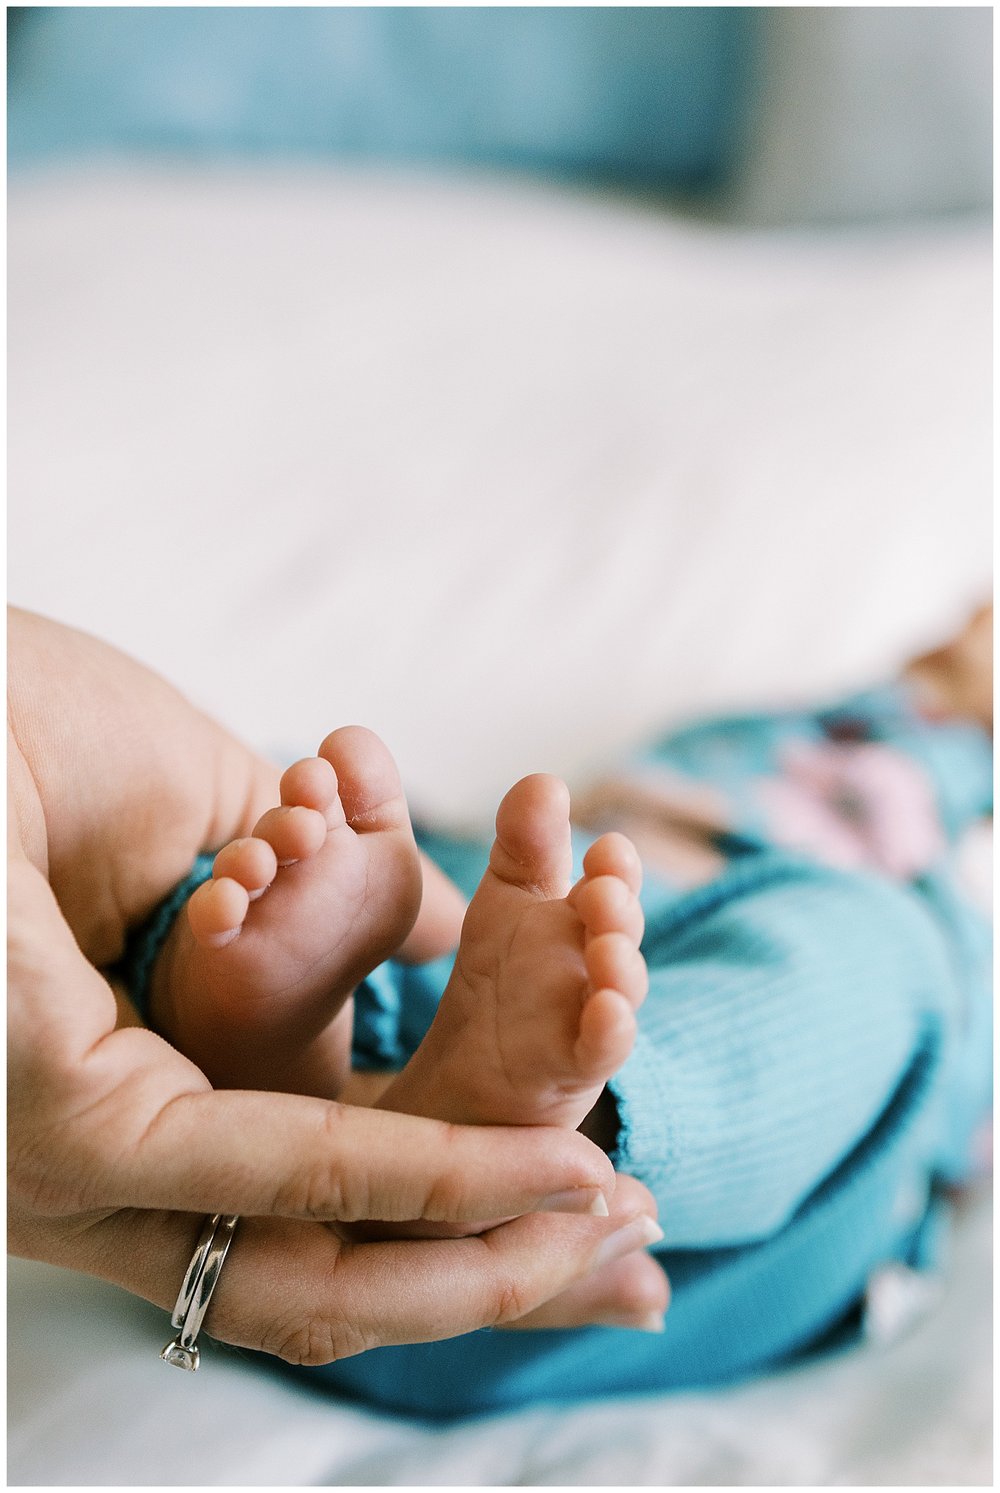 NEWBORN TWIN GIRLS HOME LIFESTYLE PHOTOGRAPHY SESSION IN ALBUQUERQUE, NEW MEXICO_0005.jpg